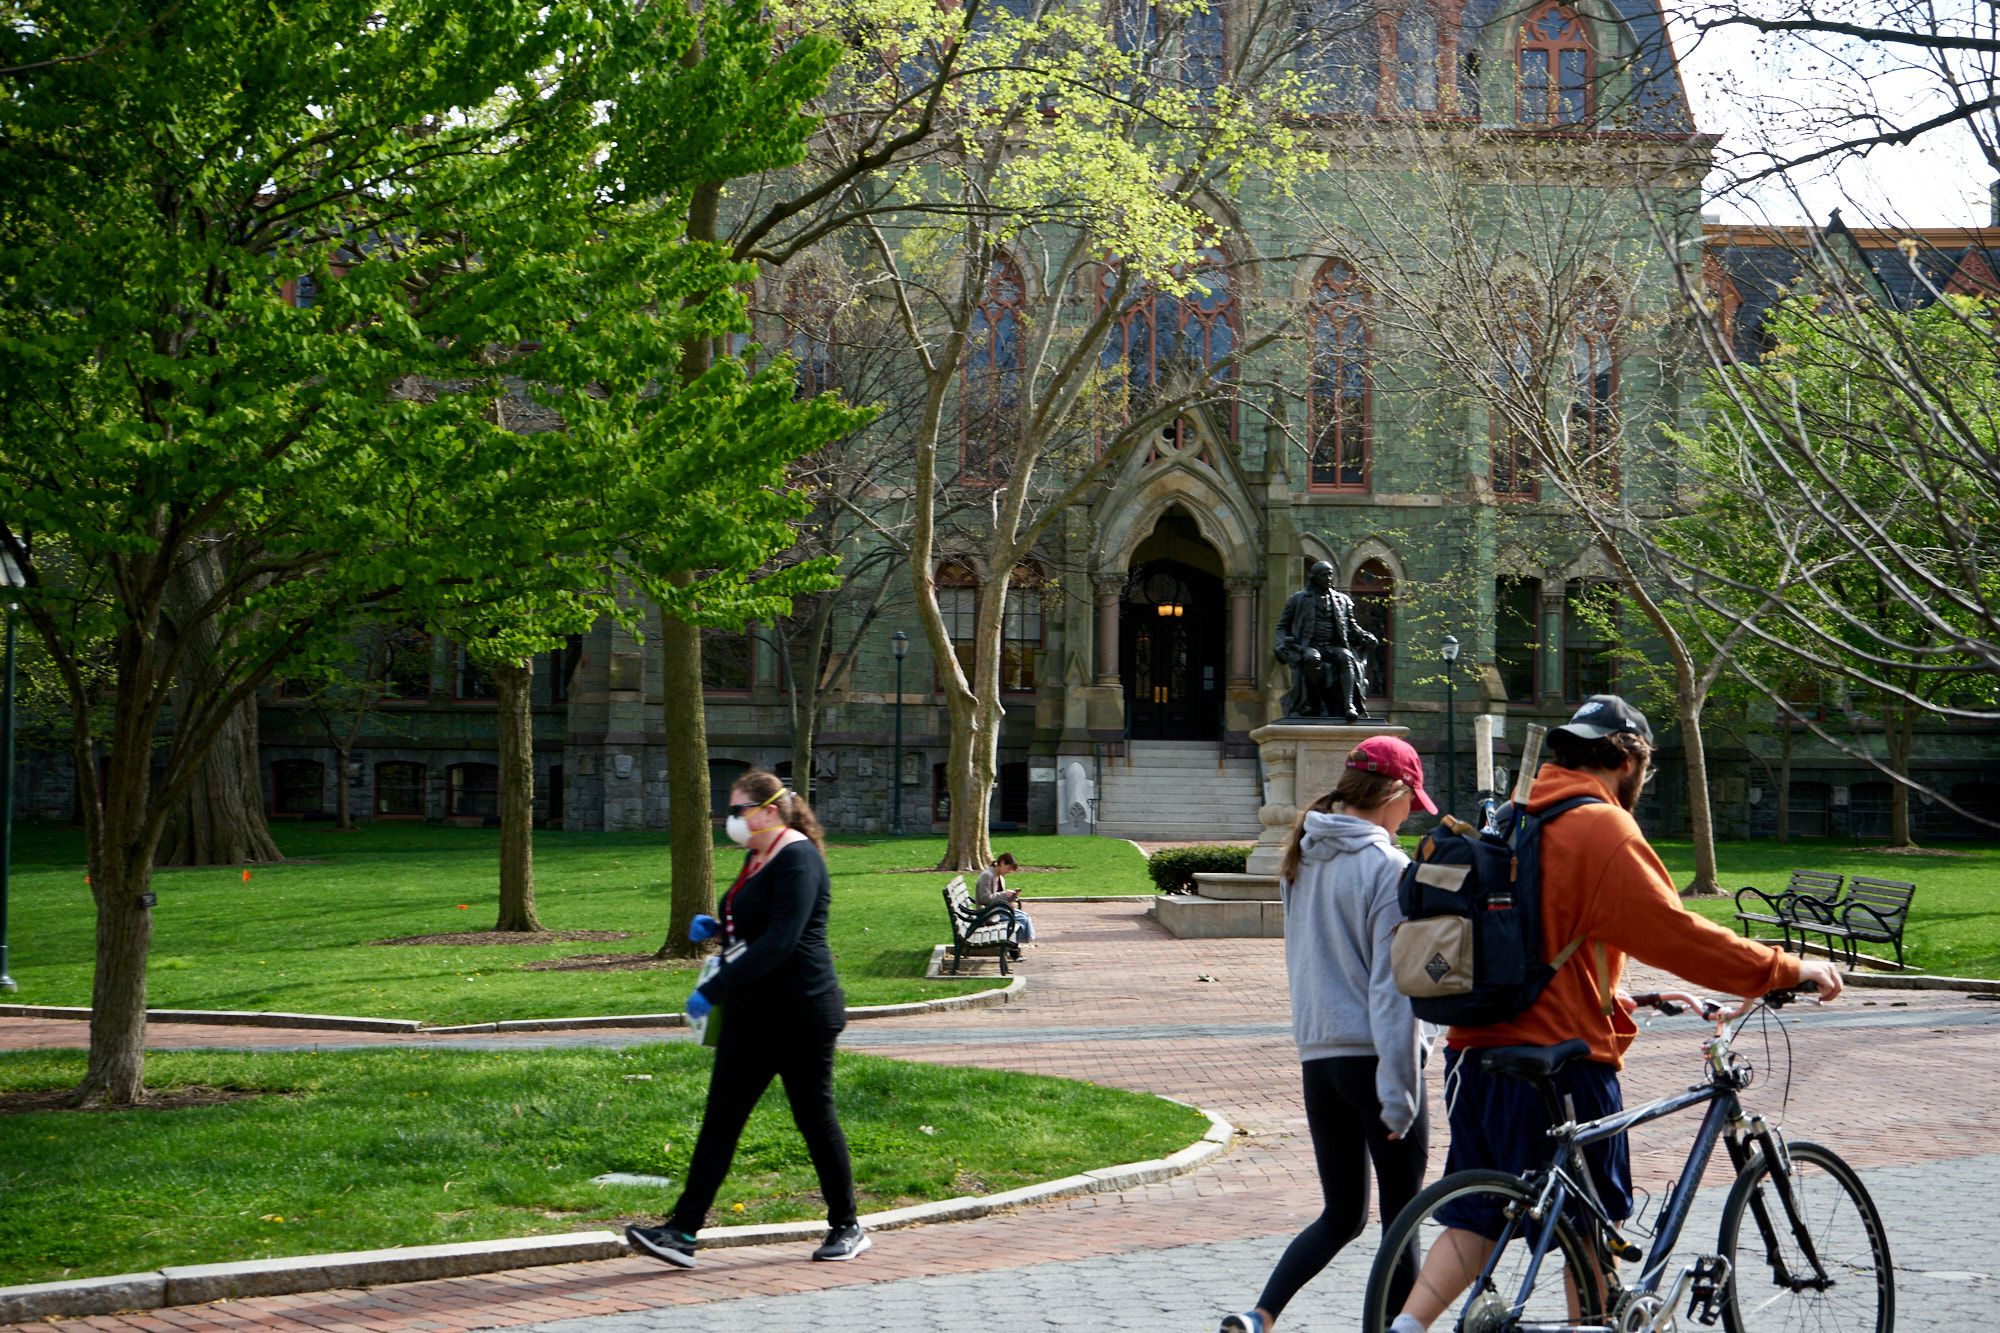 The University of Pennsylvania is only one of many universities that have transitioned to online learning. Image by Patrick Ammerman. United States, 2020.